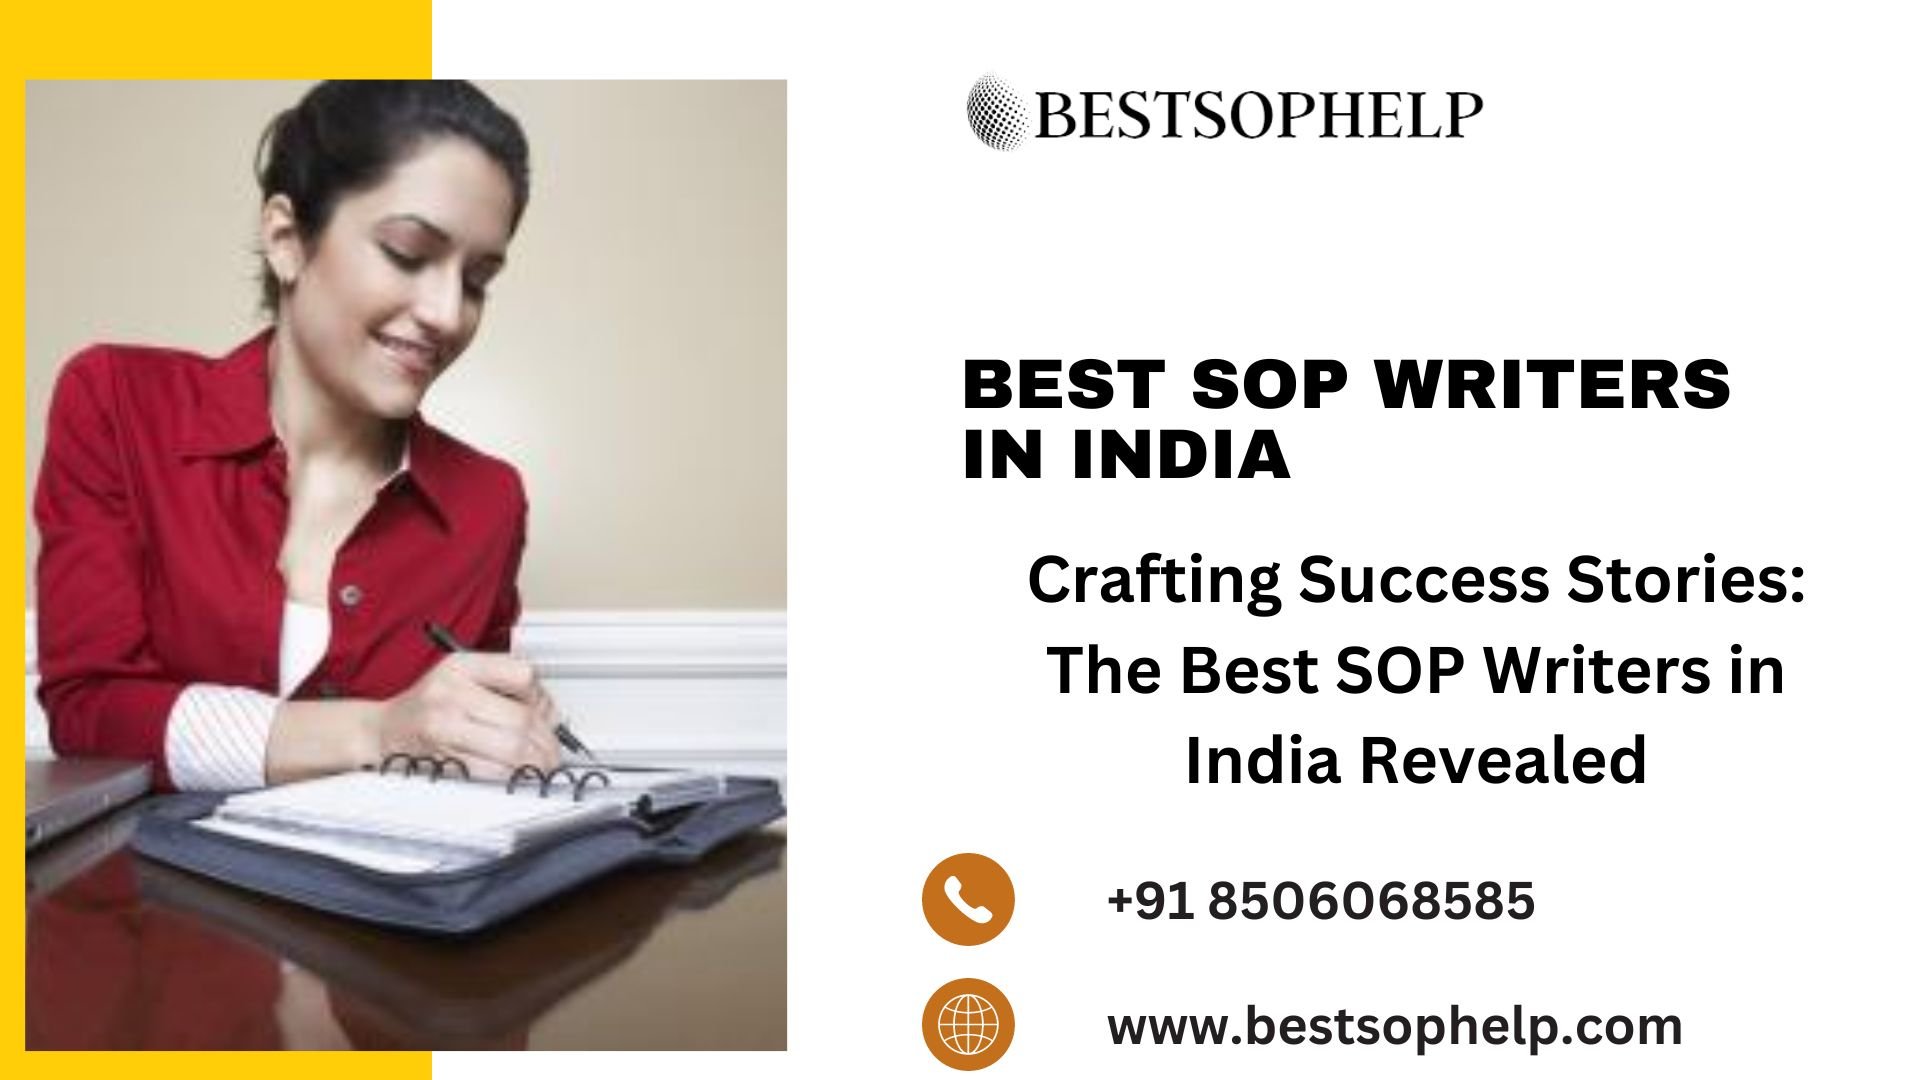 Crafting Success Stories: The Best SOP Writers in India Revealed